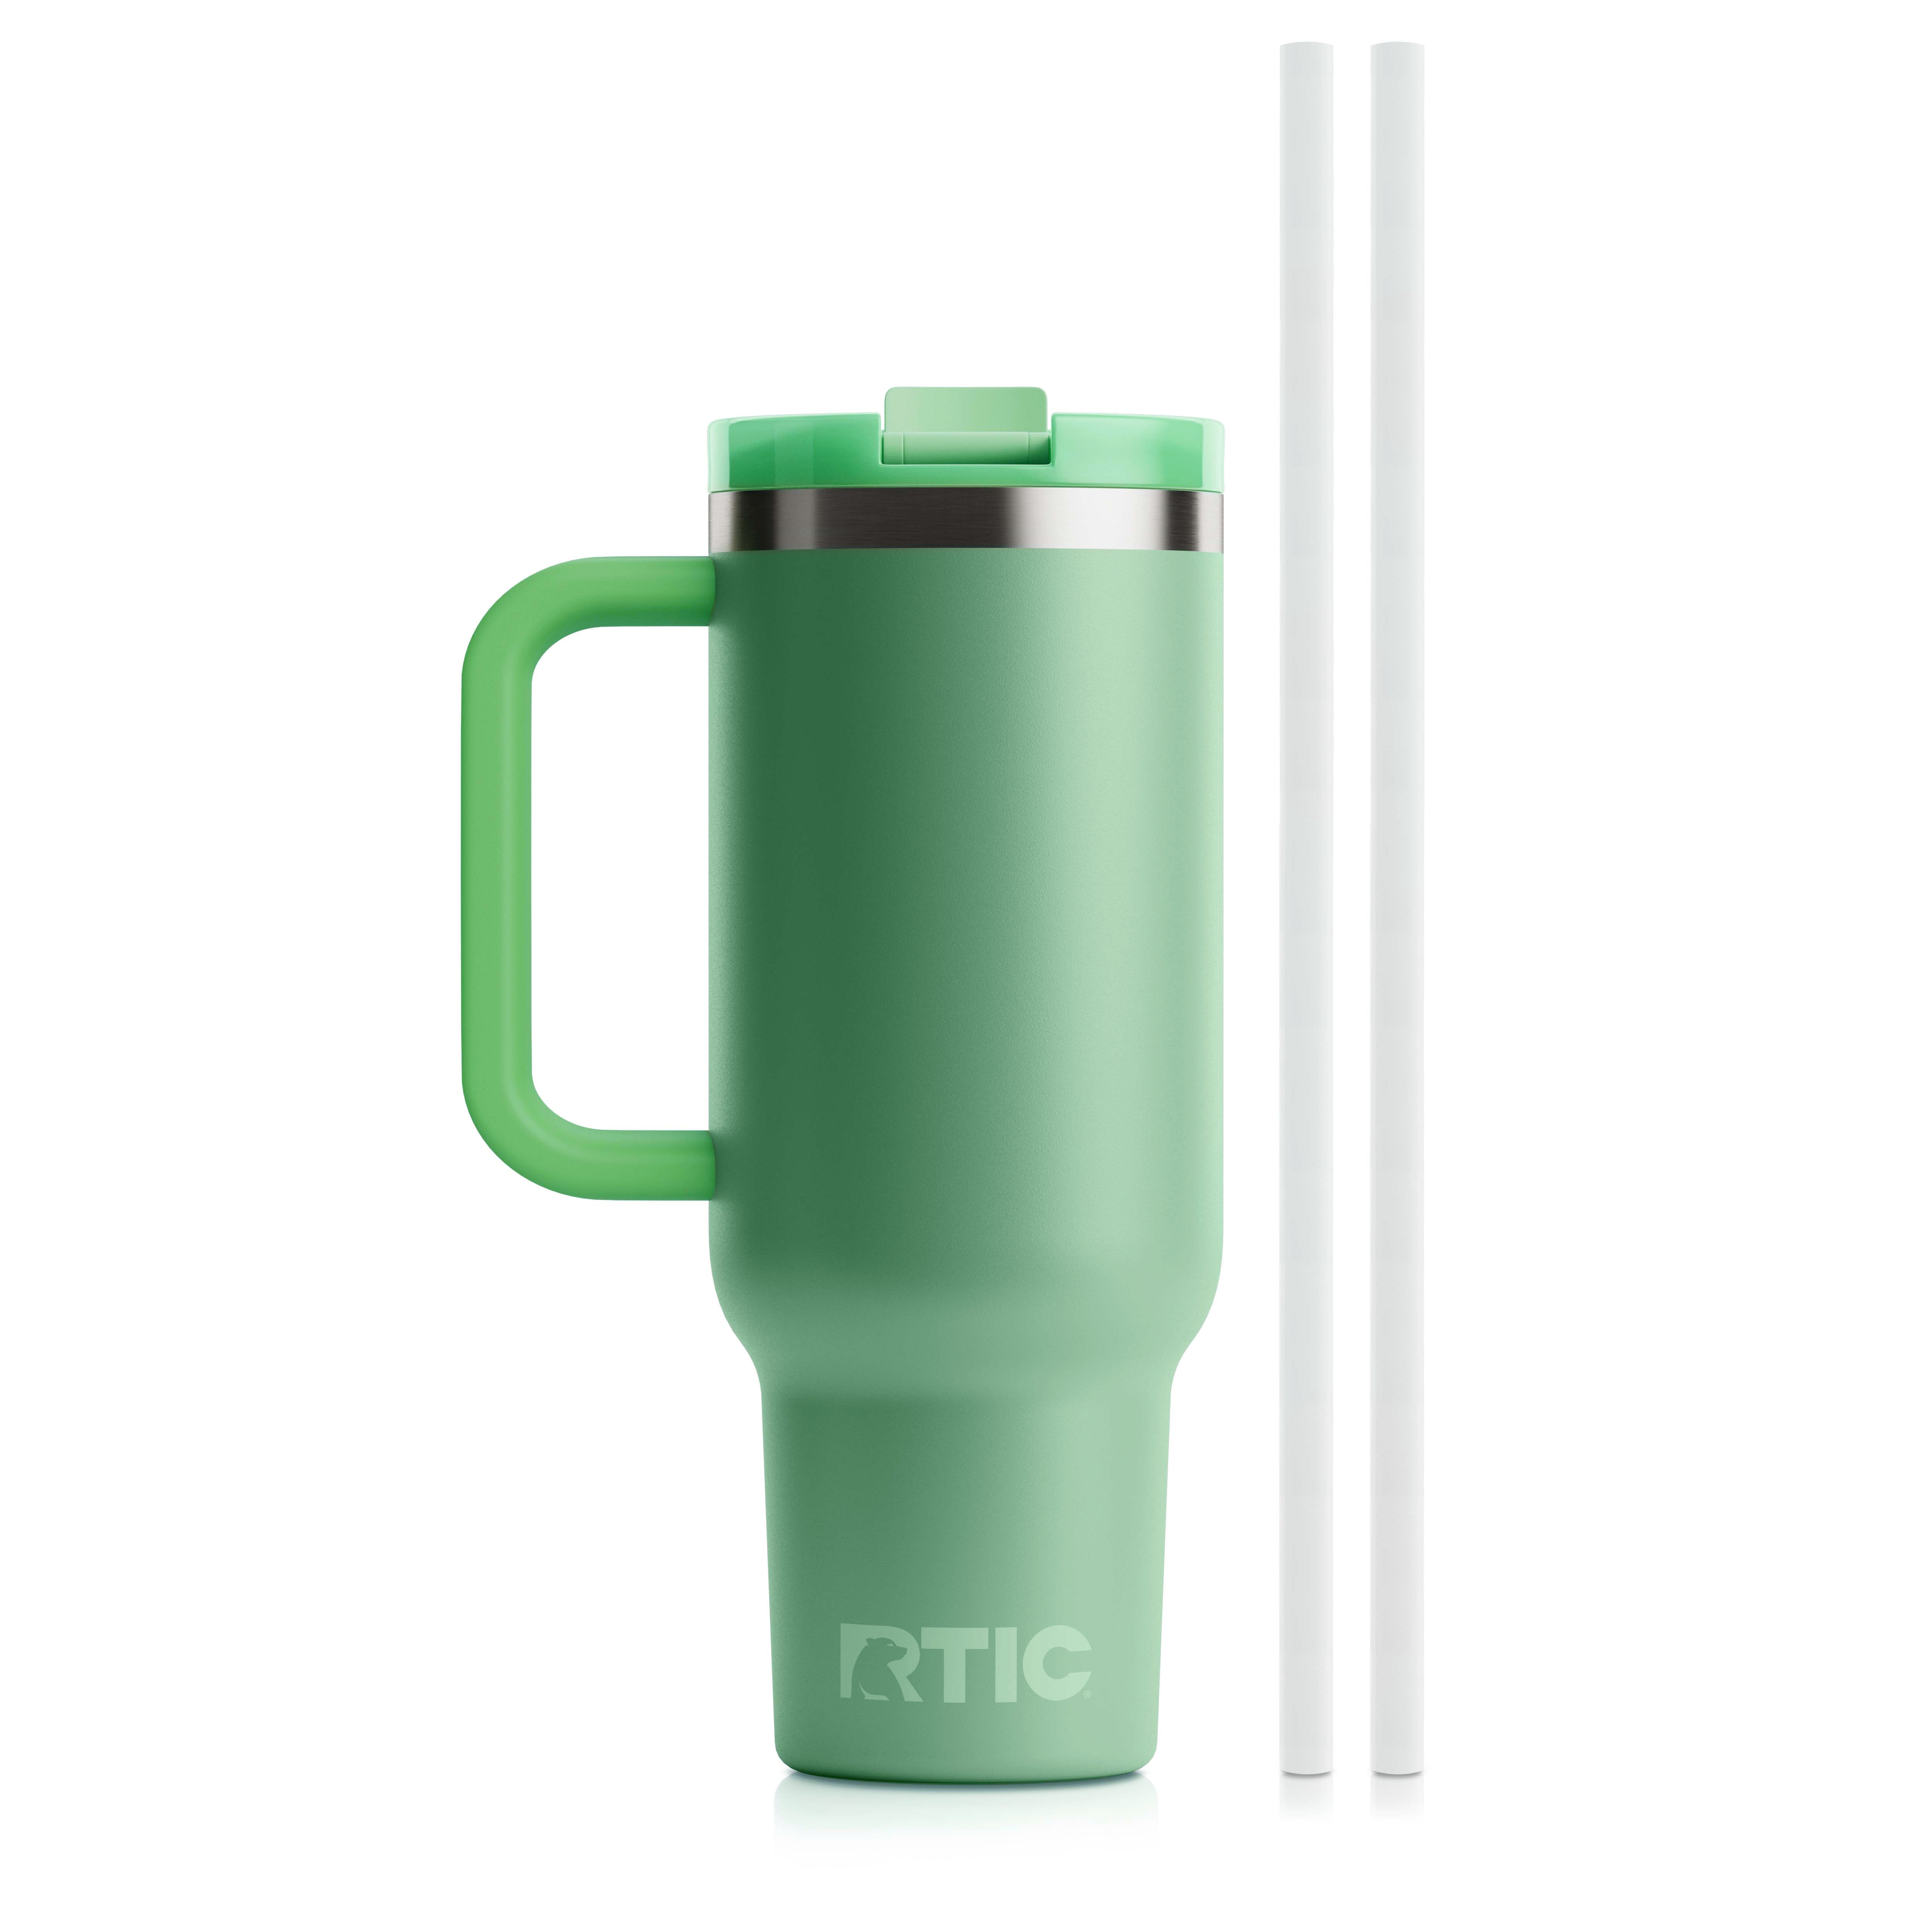 Trip　Coffee　RTIC　Double-Walled　Mug　Sage　Insulated　Lid,　Travel　Handle　Stainless　30　with　Thermal　for　and　oz　Portable　Hot　Drink,　and　Cold　Cup　Road　Camping,　Spill-Resistant,　Tumbler　Straw,　Steel　Car,